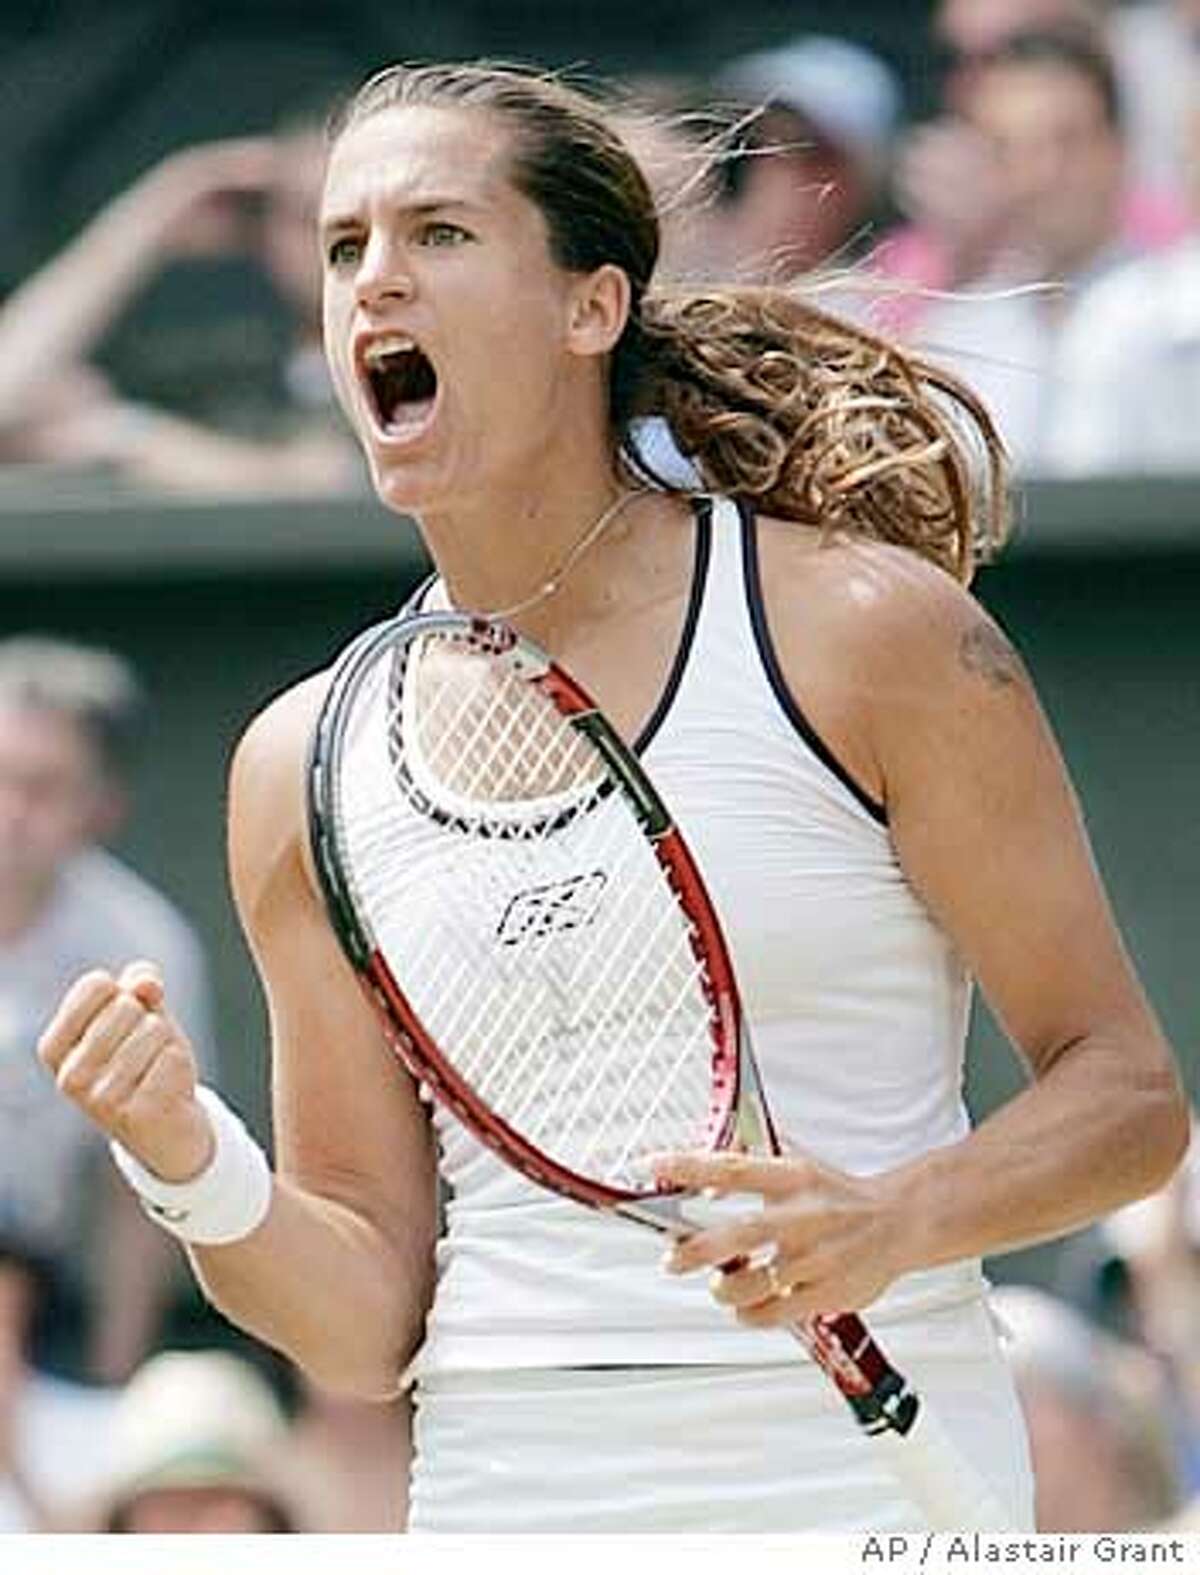 France's Amelie Mauresmo punches the air as she defeats Anastasia Myskina of Russia in their Women's Singles quarter-final match on the Centre Court at Wimbledon, Tuesday June 28, 2005. Mauresmo won the match 6-3, 6-4 to reach the semi-finals of the tournament.(AP Photo/Alastair Grant)